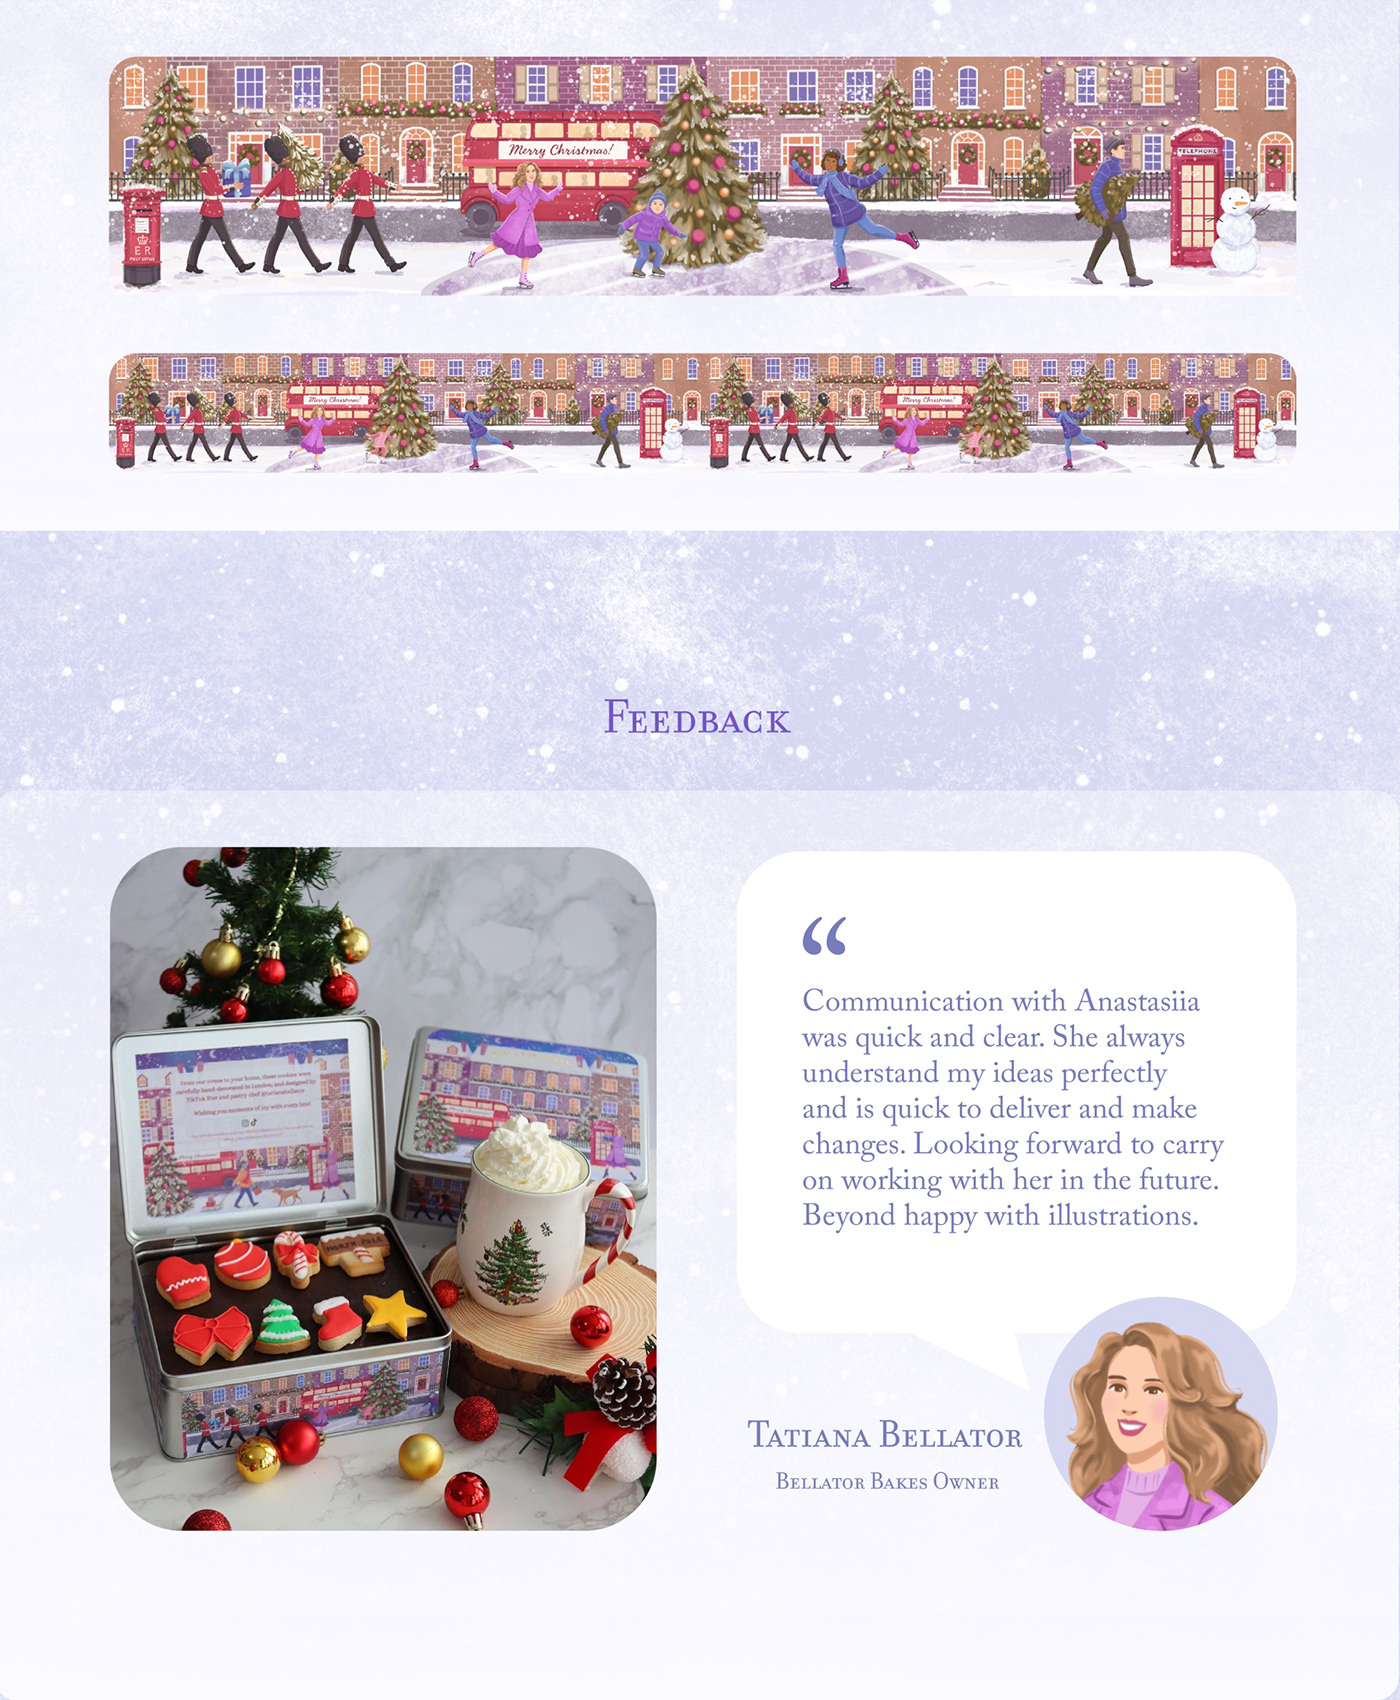 Christmas packaging illustration of London, United Kingdom
For bakery, chocolate and cookies shop
